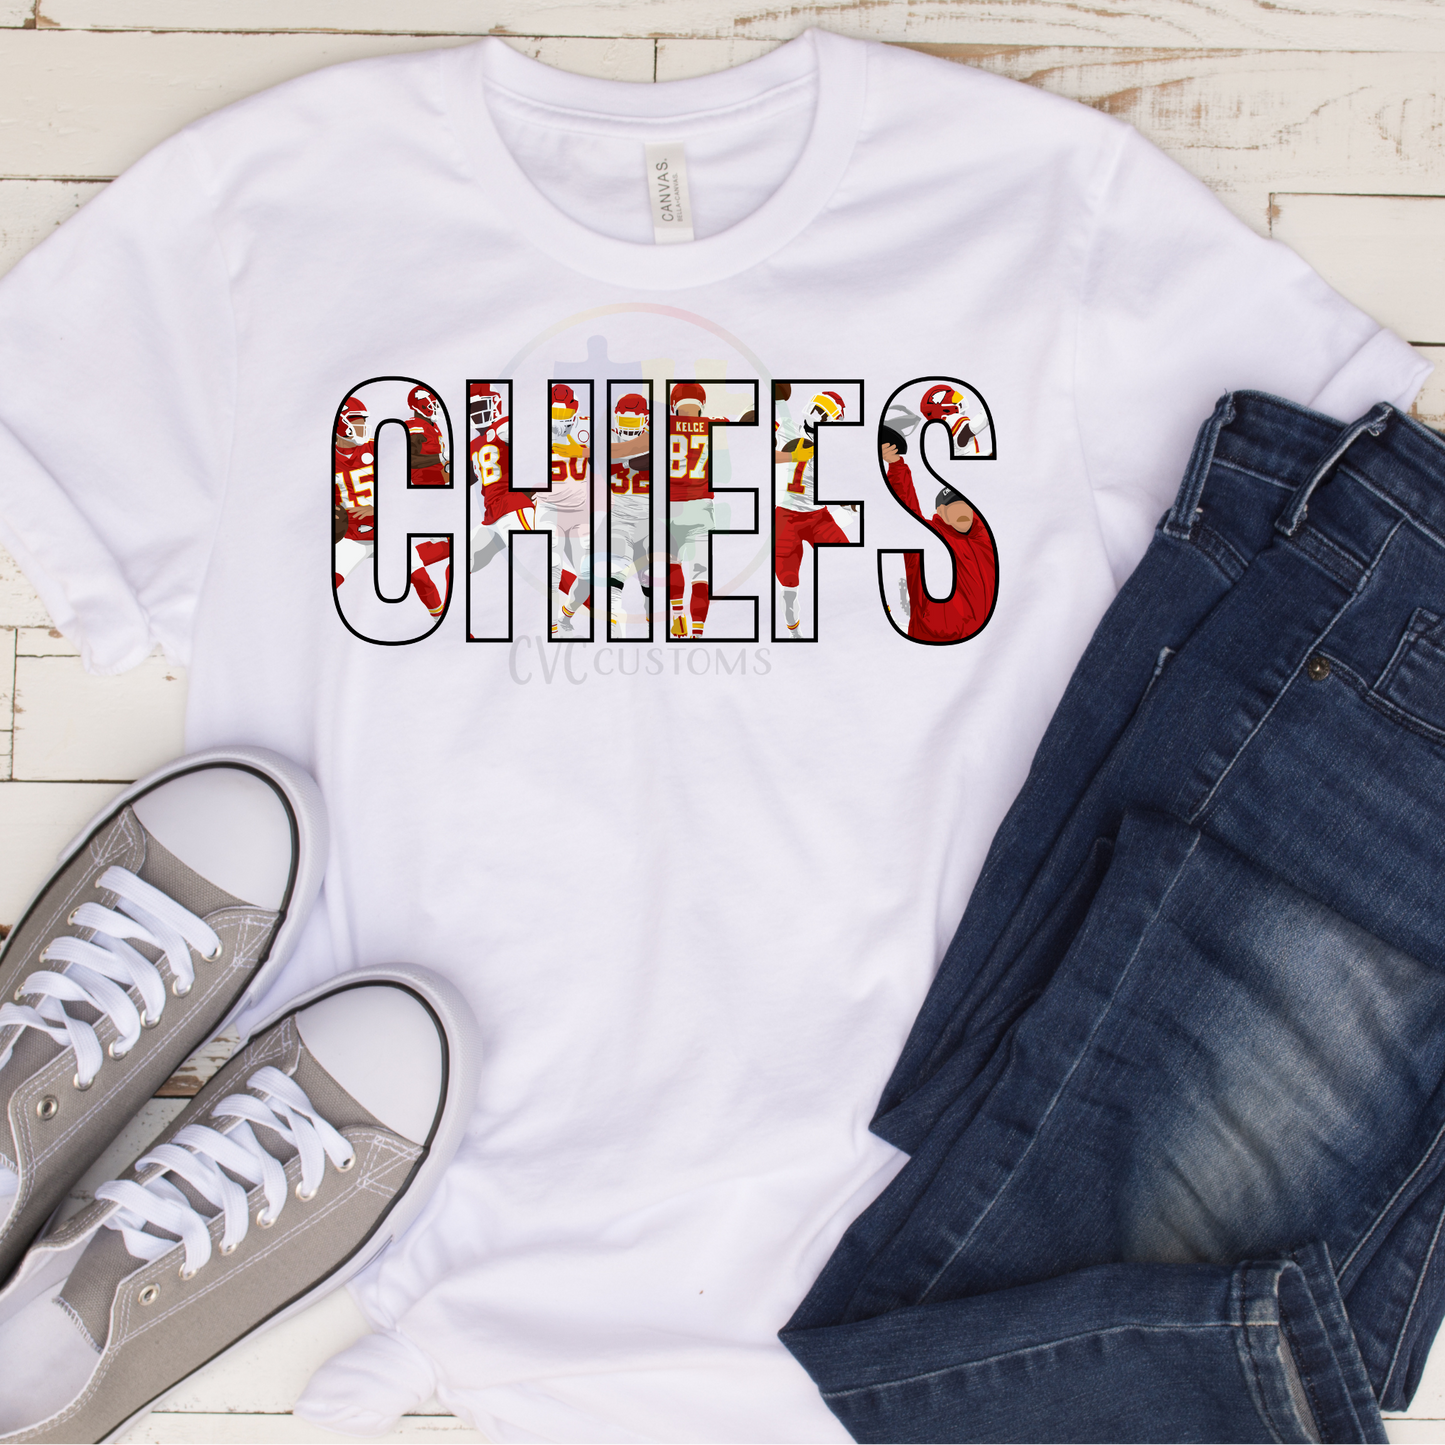 Outlined Football Teams (Chiefs/Niners)